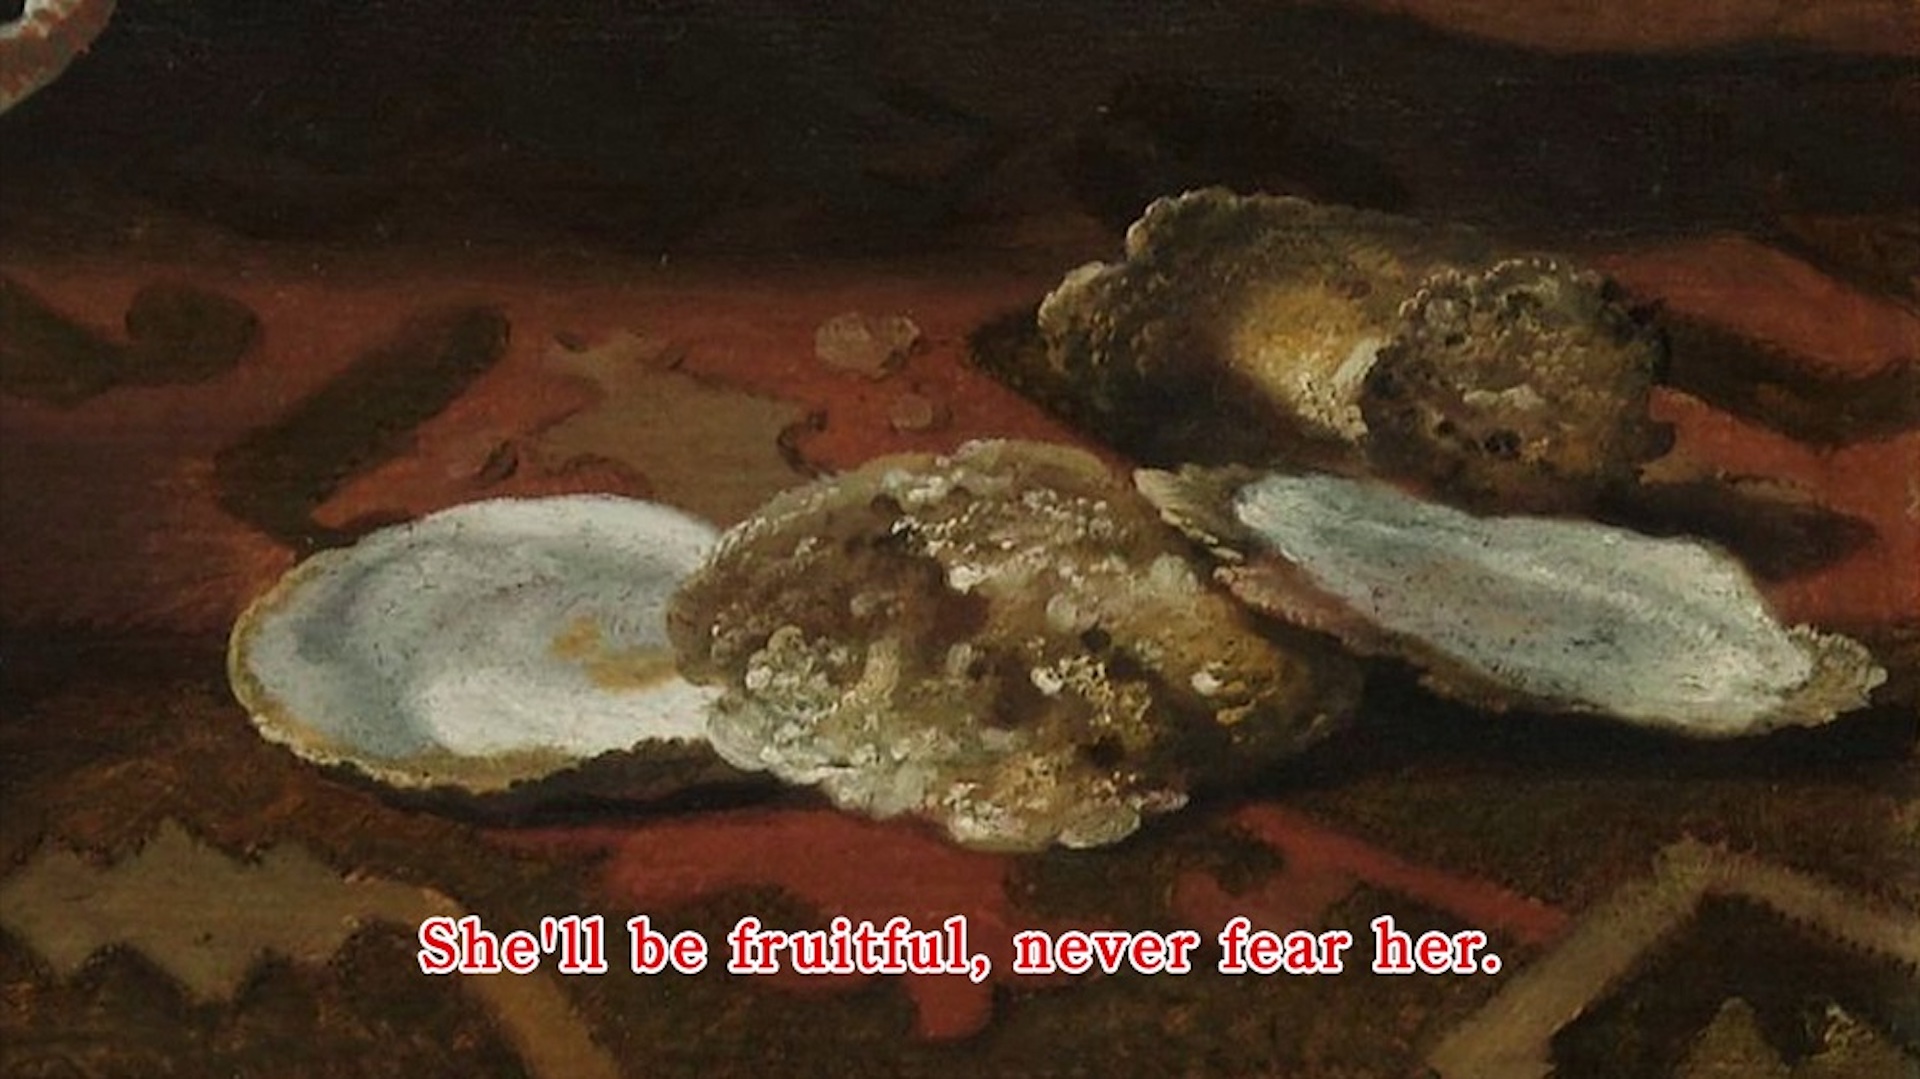 A painting of oysters on an orangey red tablecloth, with the words "she'll be fruitful, never fear her" written beneath in red letters.